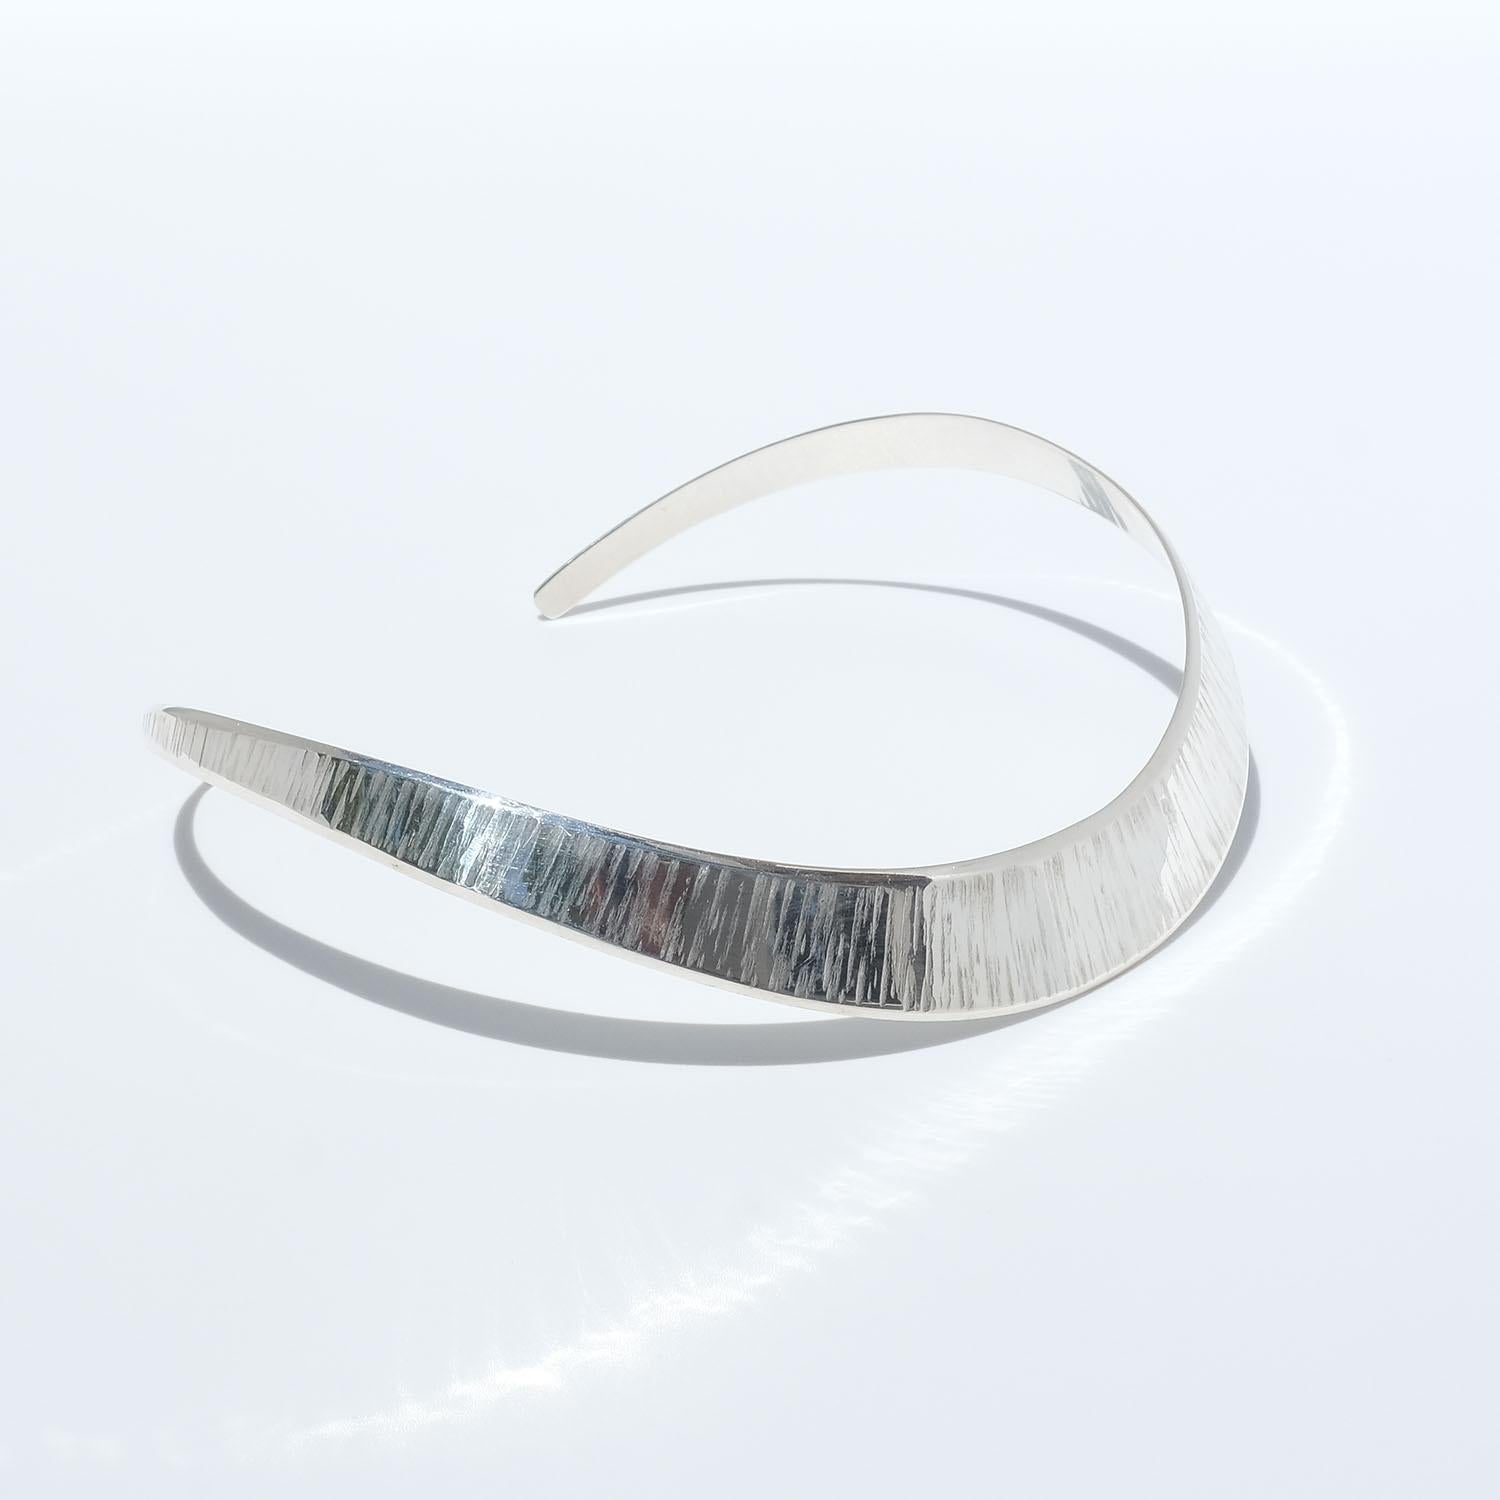 This fixed sterling silver neck ring has a beautiful patterned surface. When holding it you can feel the quality and genuine handcraft.

The neck ring is simple but yet elegant and it will complement your outfit in a splendid way whether it is an